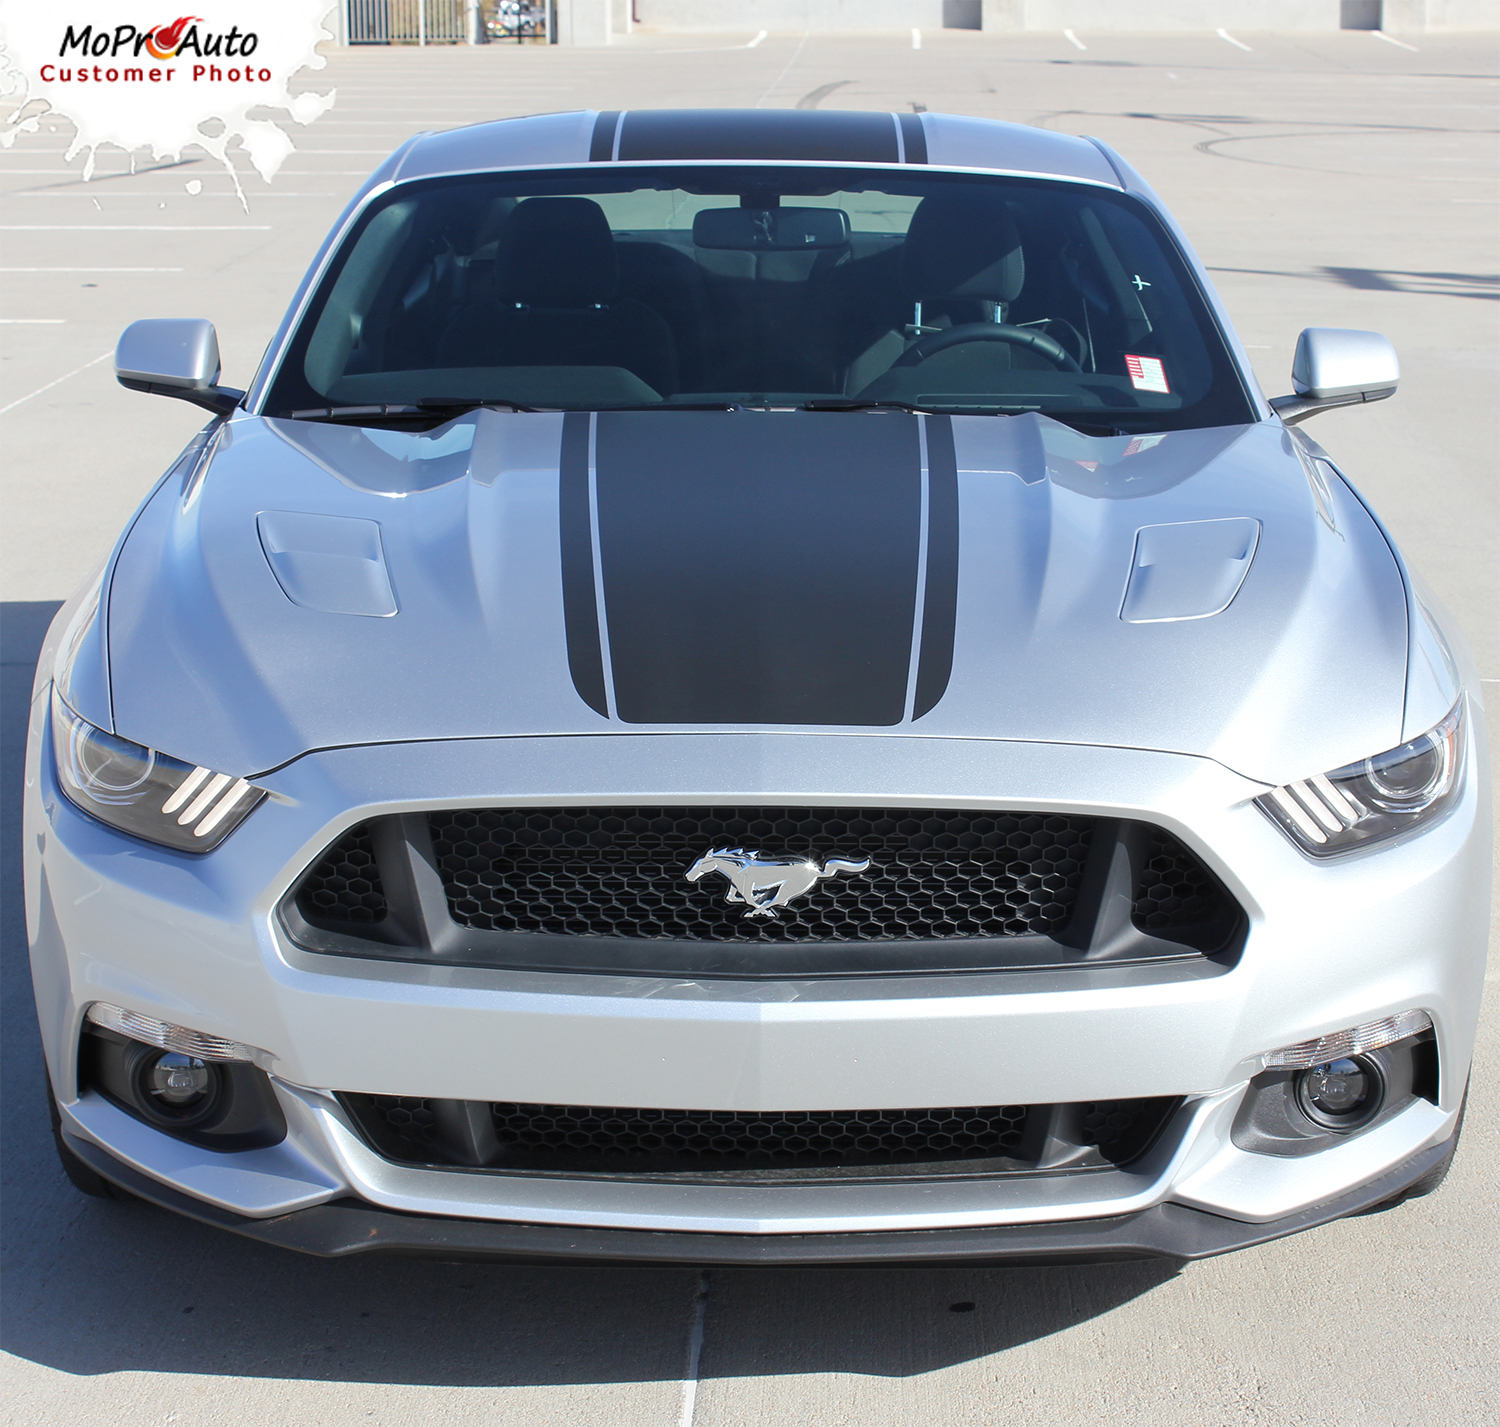 MEDIAN : Ford Mustang 2015+ MoProAuto Pro Design Series Vinyl Graphics and Decals Kit